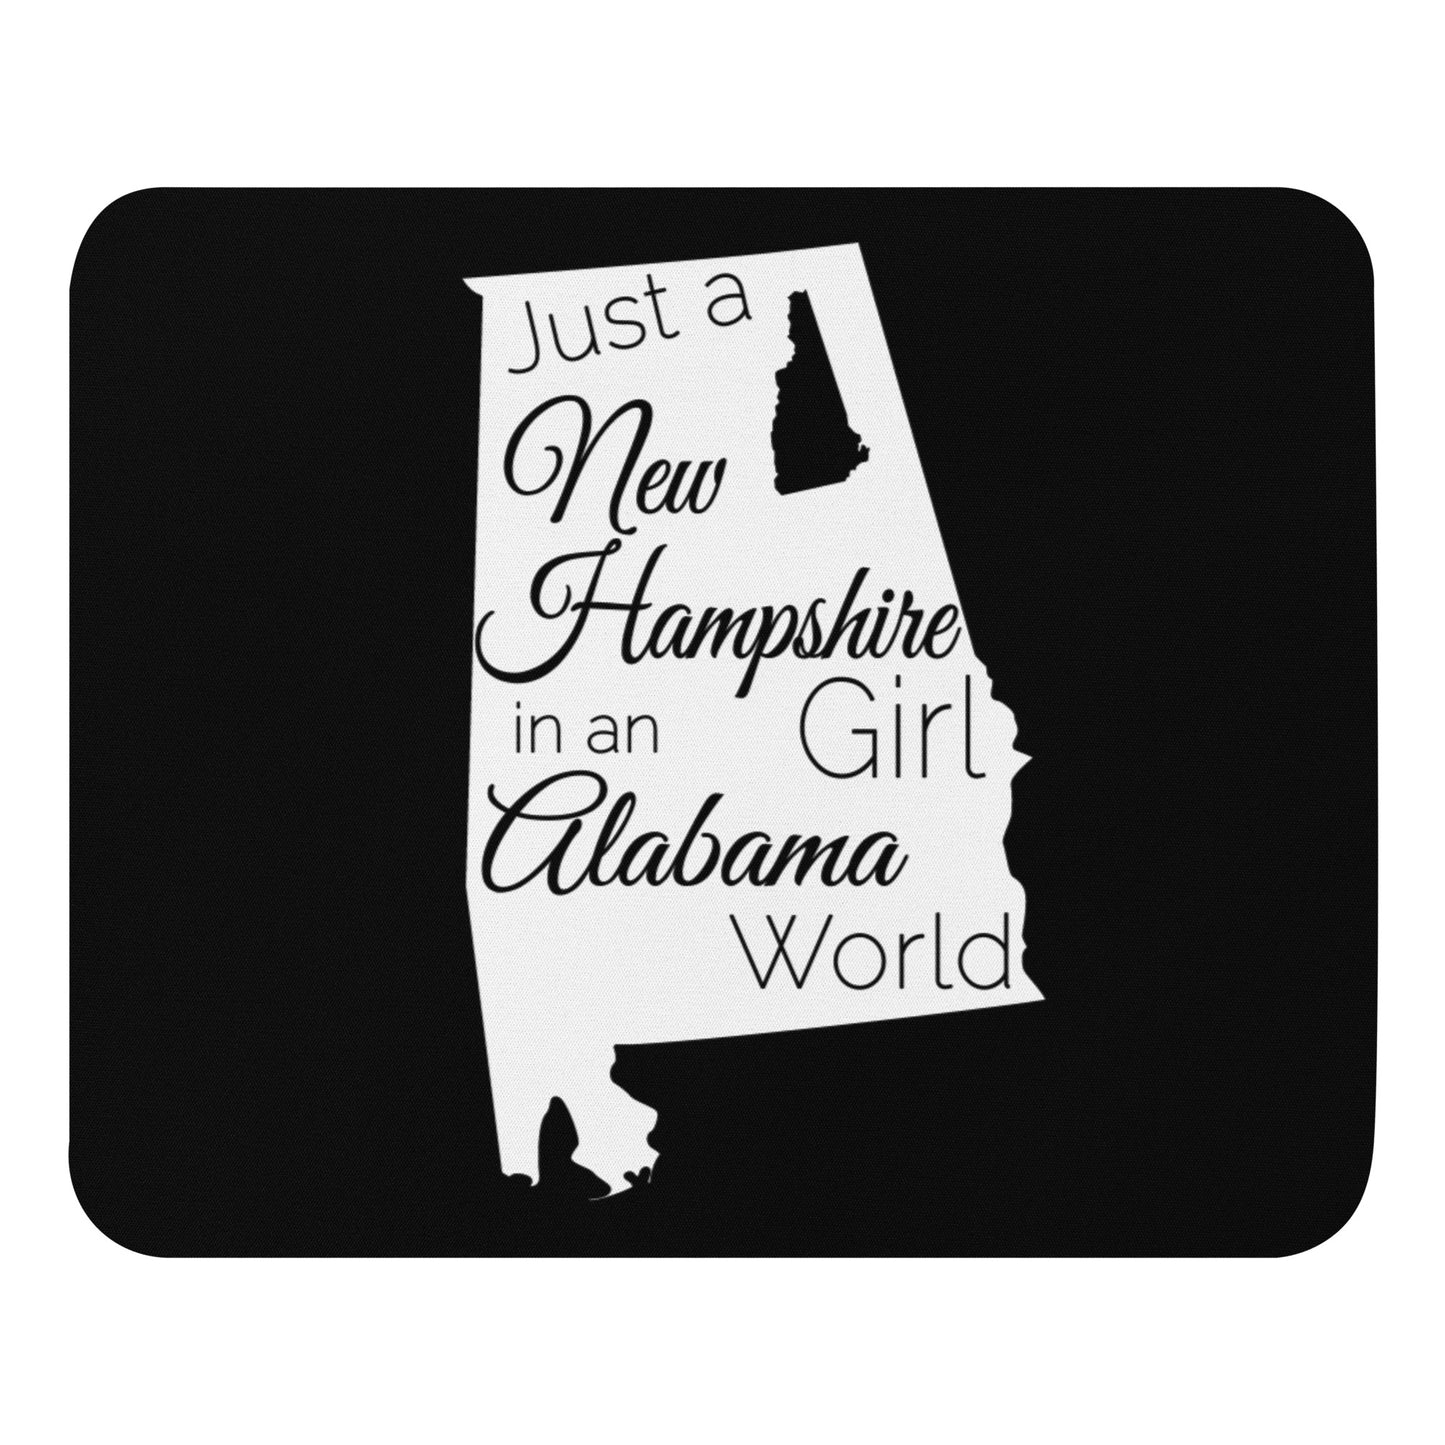 Just a New Hampshire Girl in an Alabama World Mouse pad